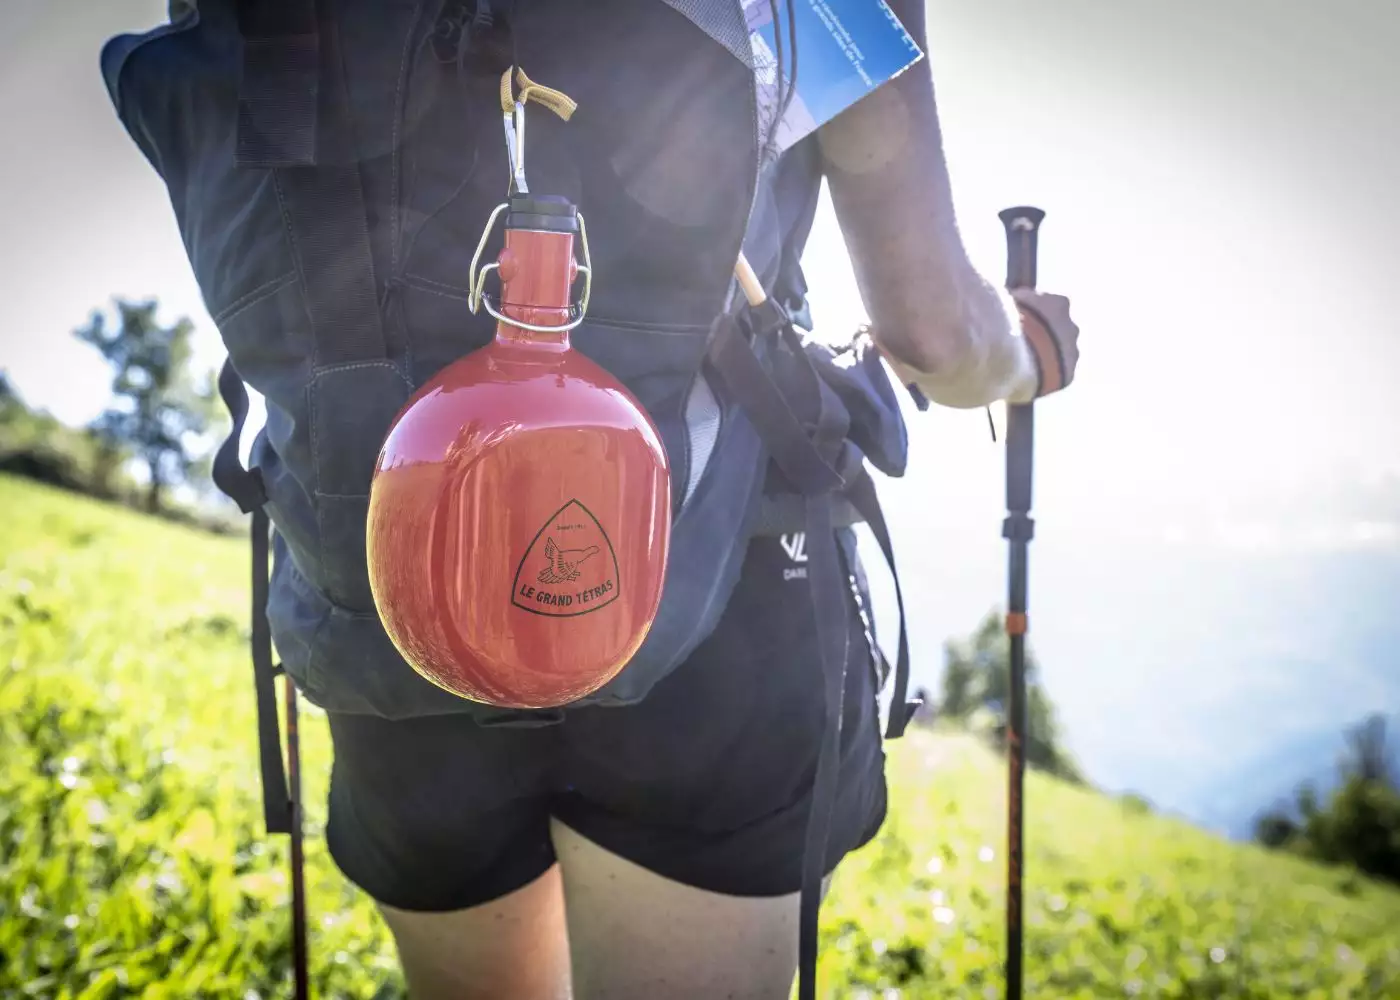 HOW TO EQUIP YOURSELF FOR A HIKE